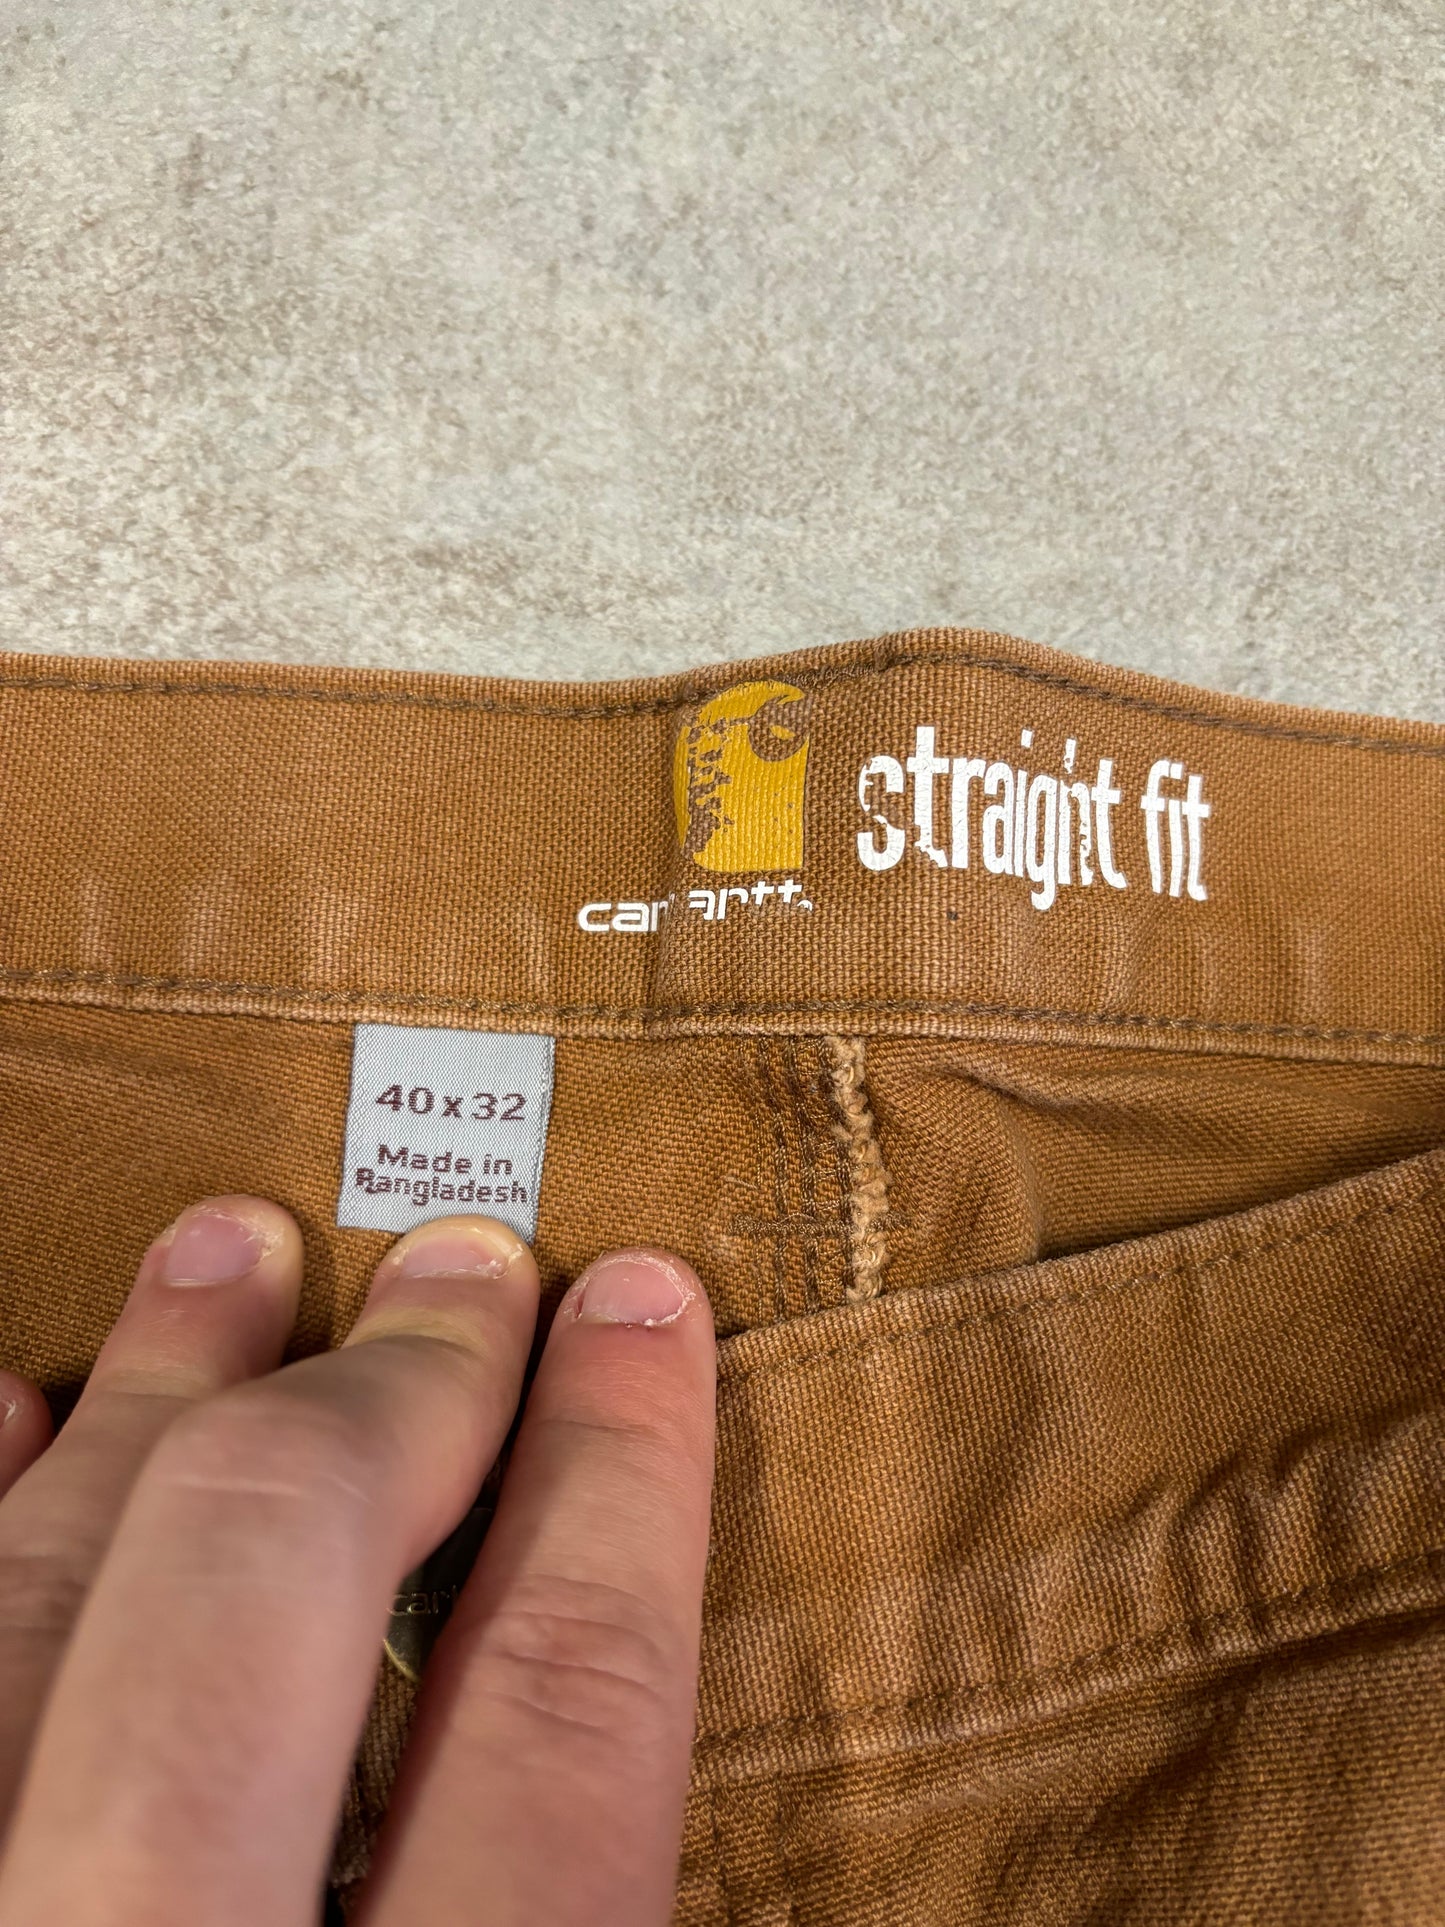 Carpenter Carhartt 'Stained' Pants - XL